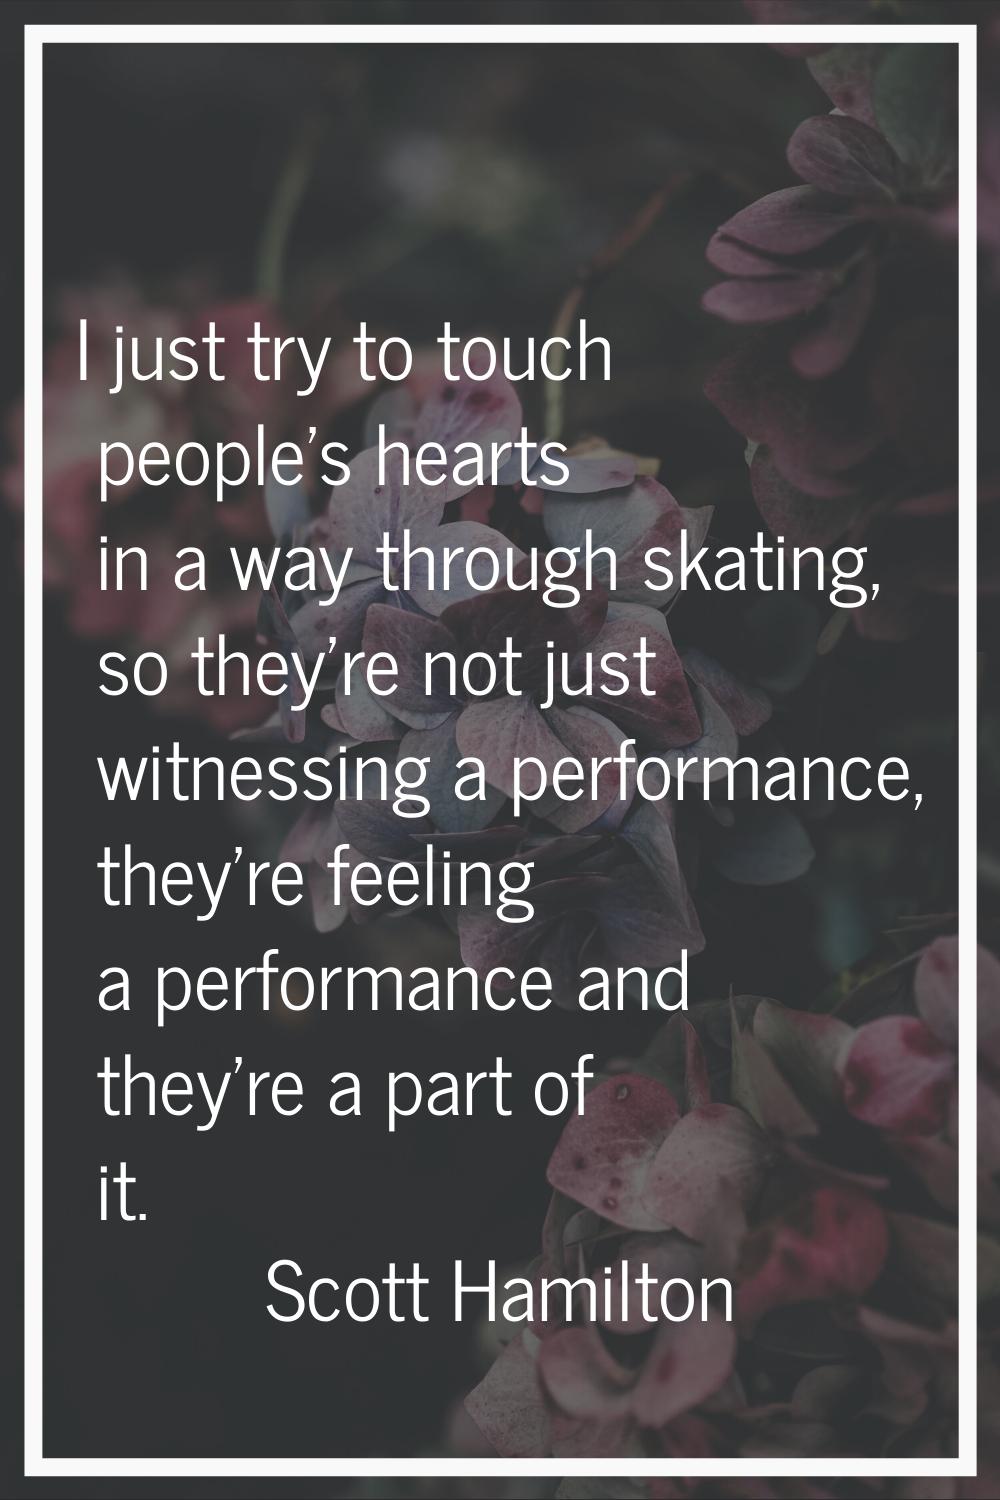 I just try to touch people's hearts in a way through skating, so they're not just witnessing a perf